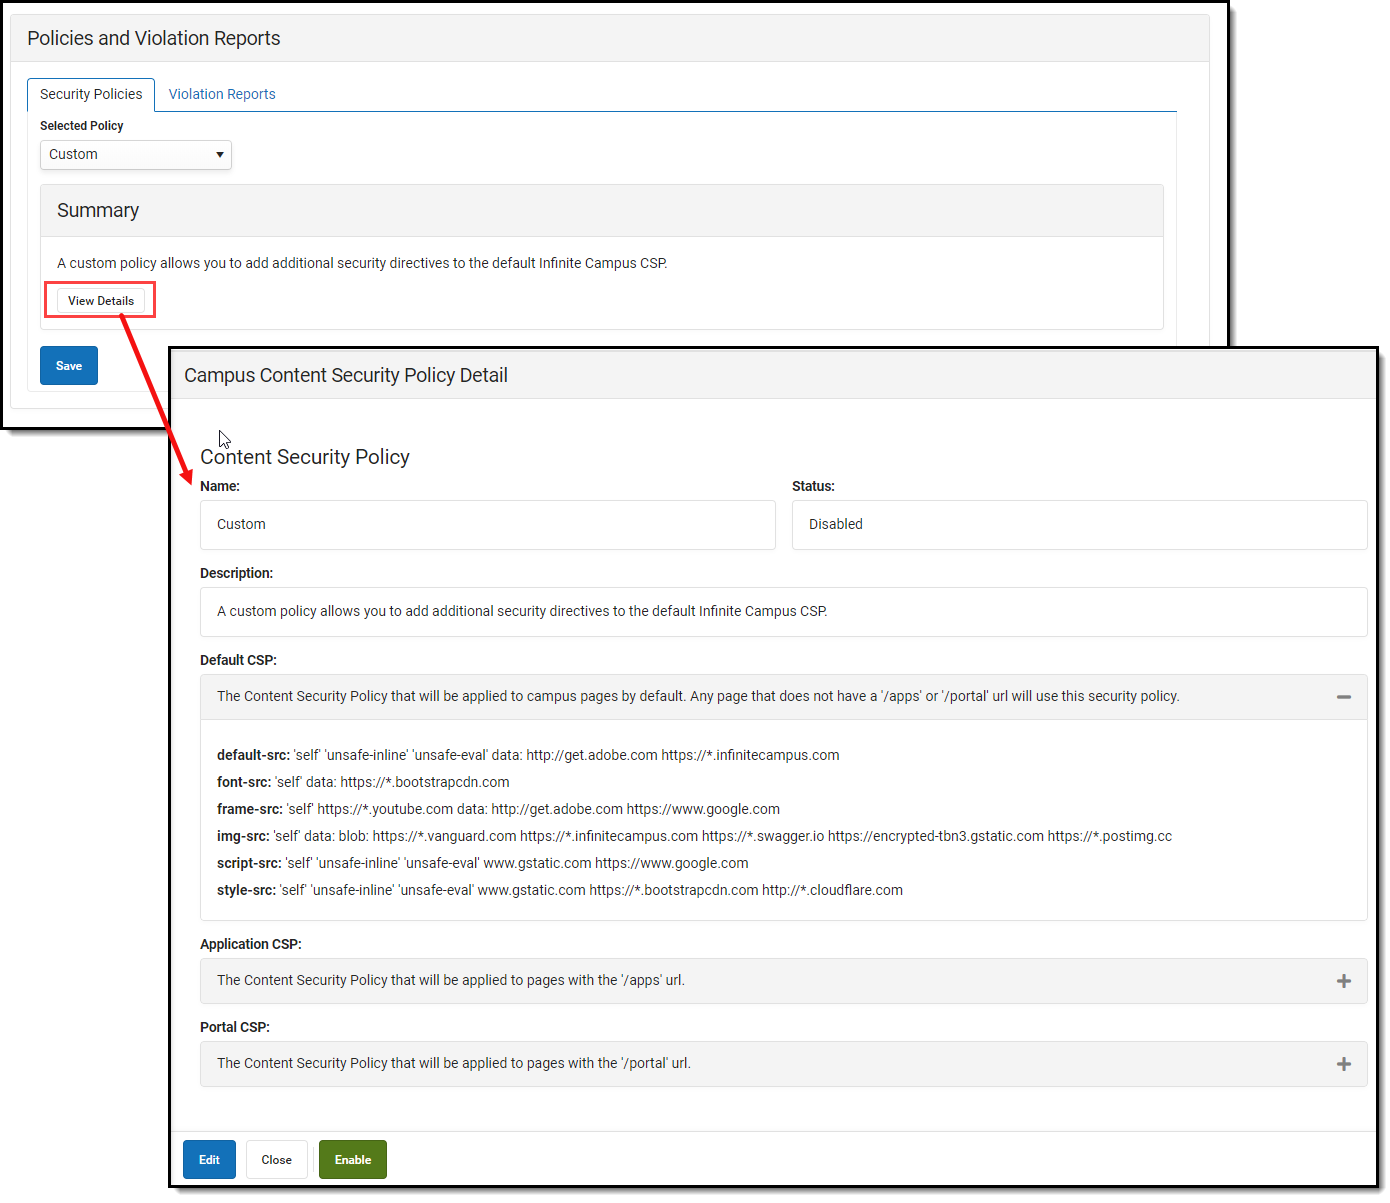 screenshot of viewing the details of a custom policy